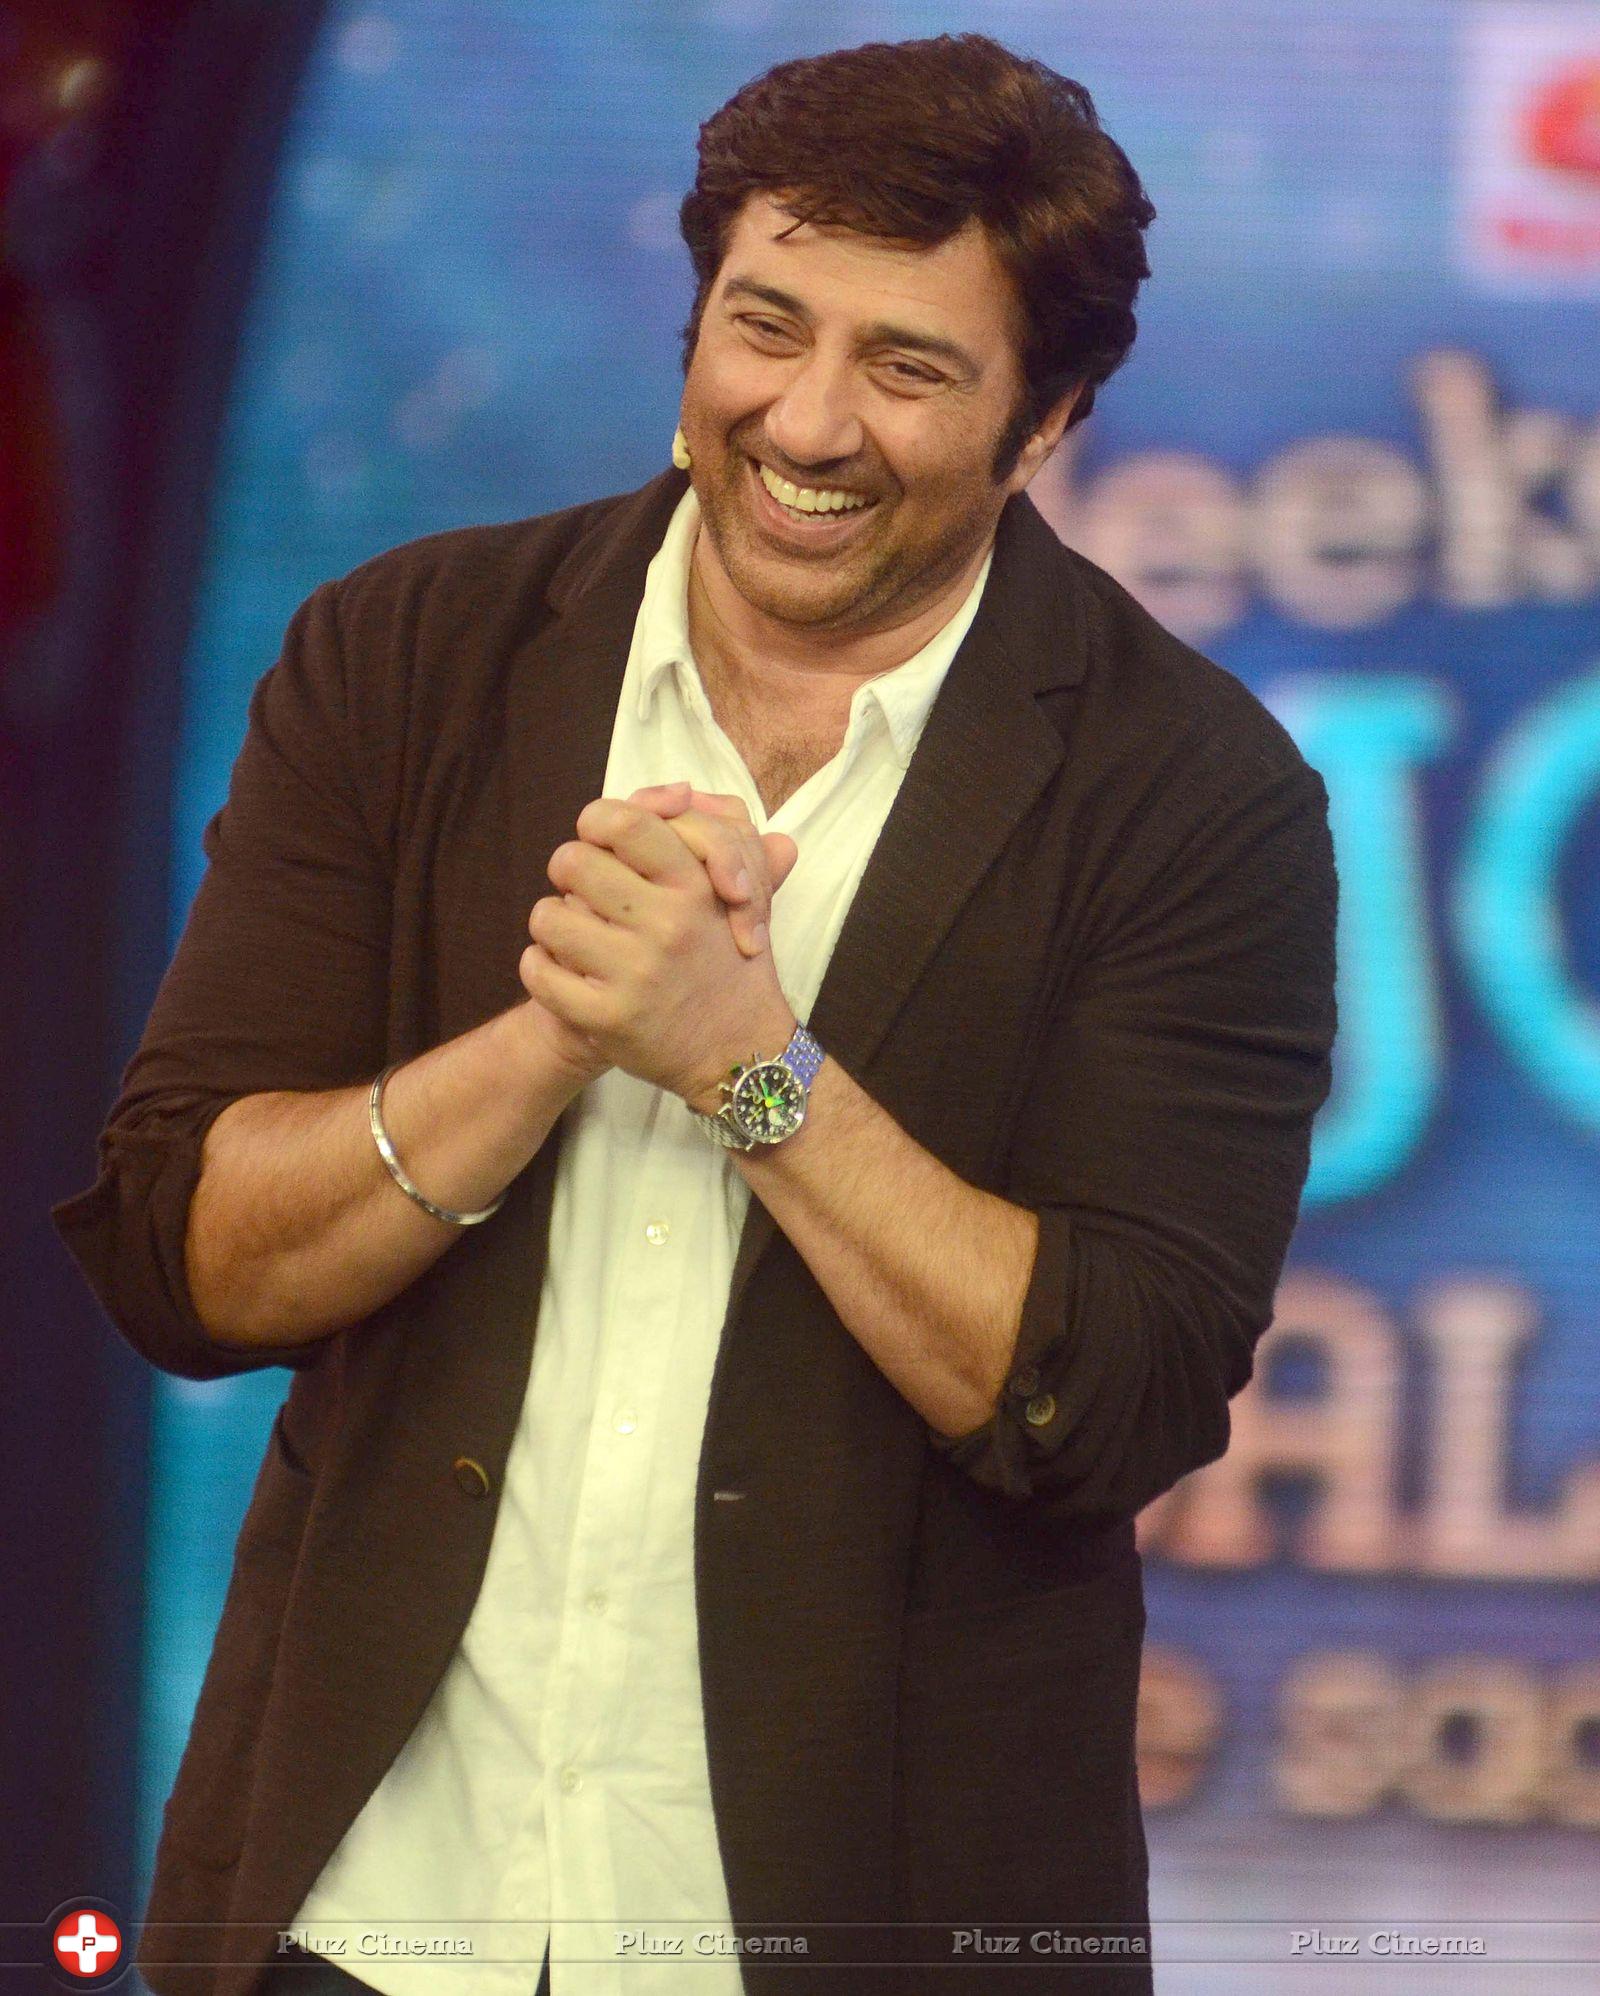 Sunny Deol - Sunny Deol promotes his film Singh Sahab The Great on the sets of Big Boss With Salman Khan Photos | Picture 633454